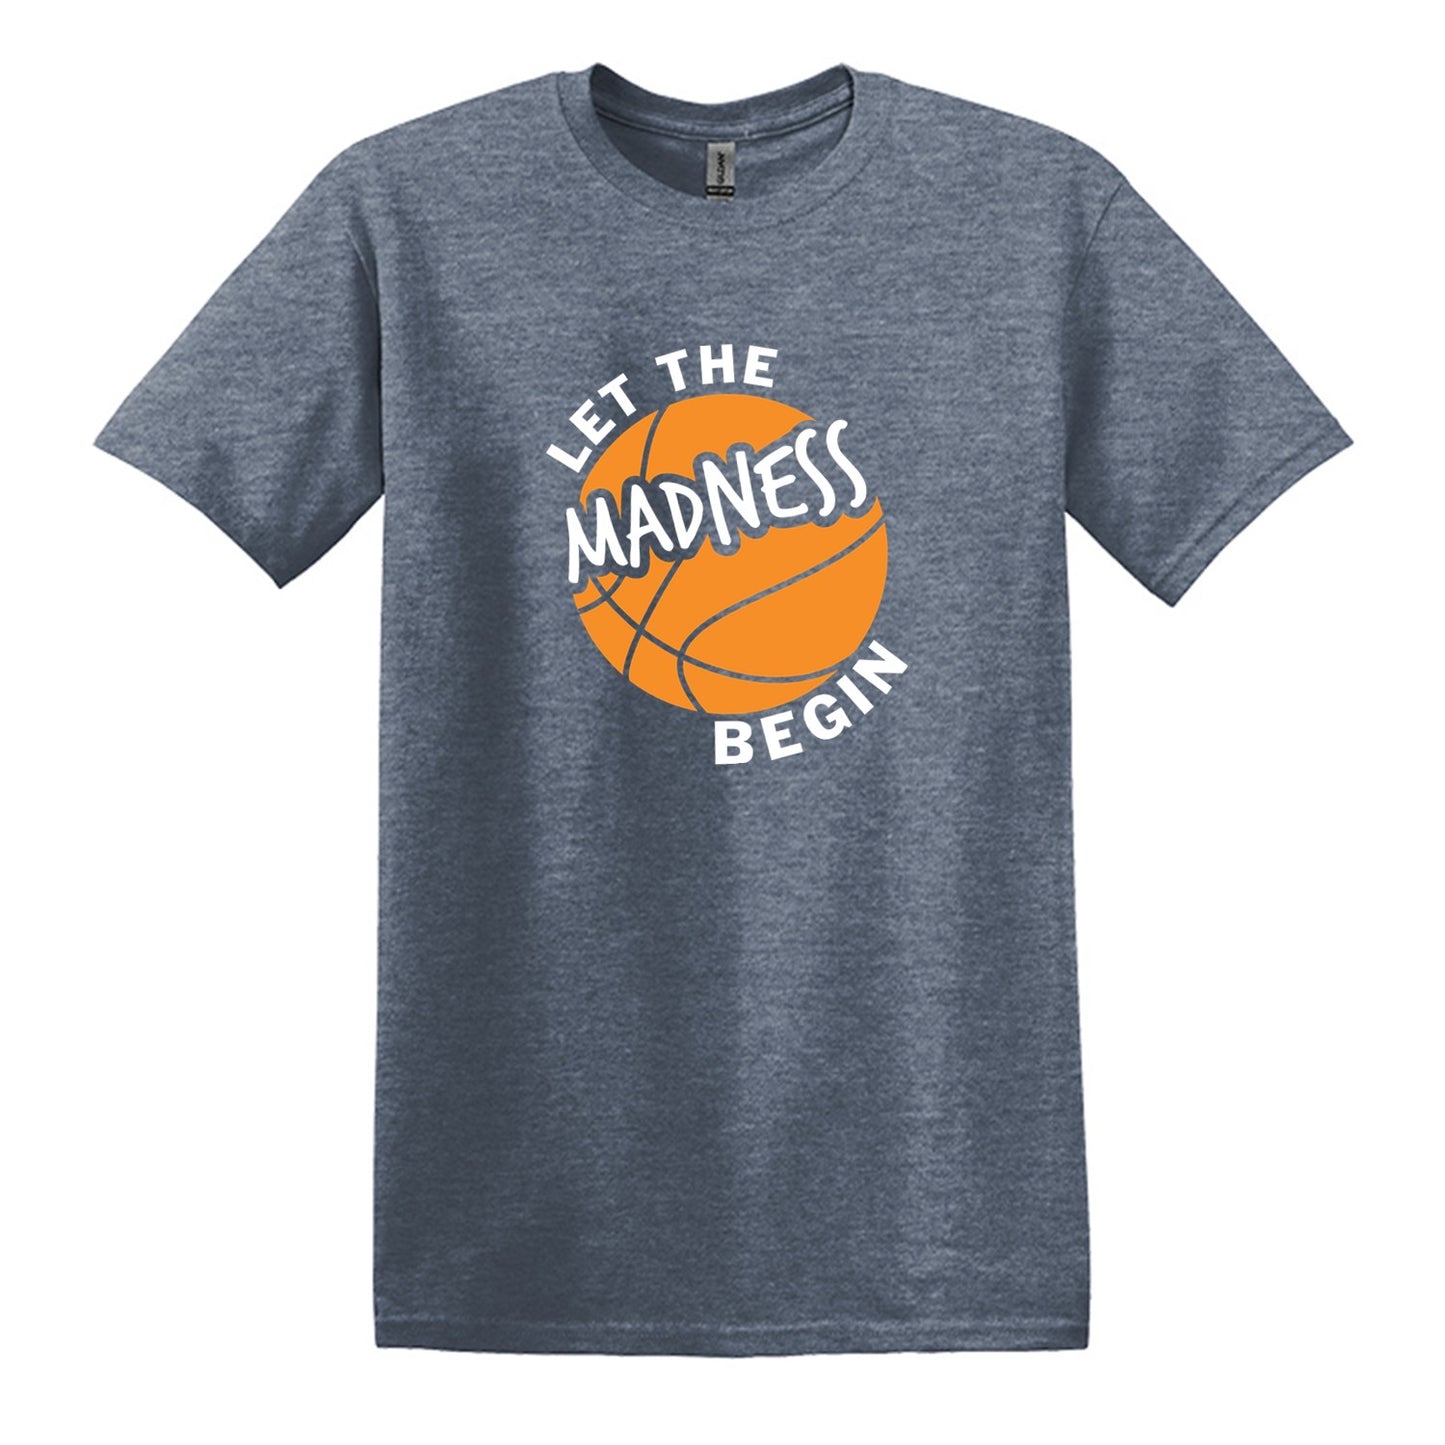 Let the Madness Begin!  -  March Madness Adult Unisex T-shirt